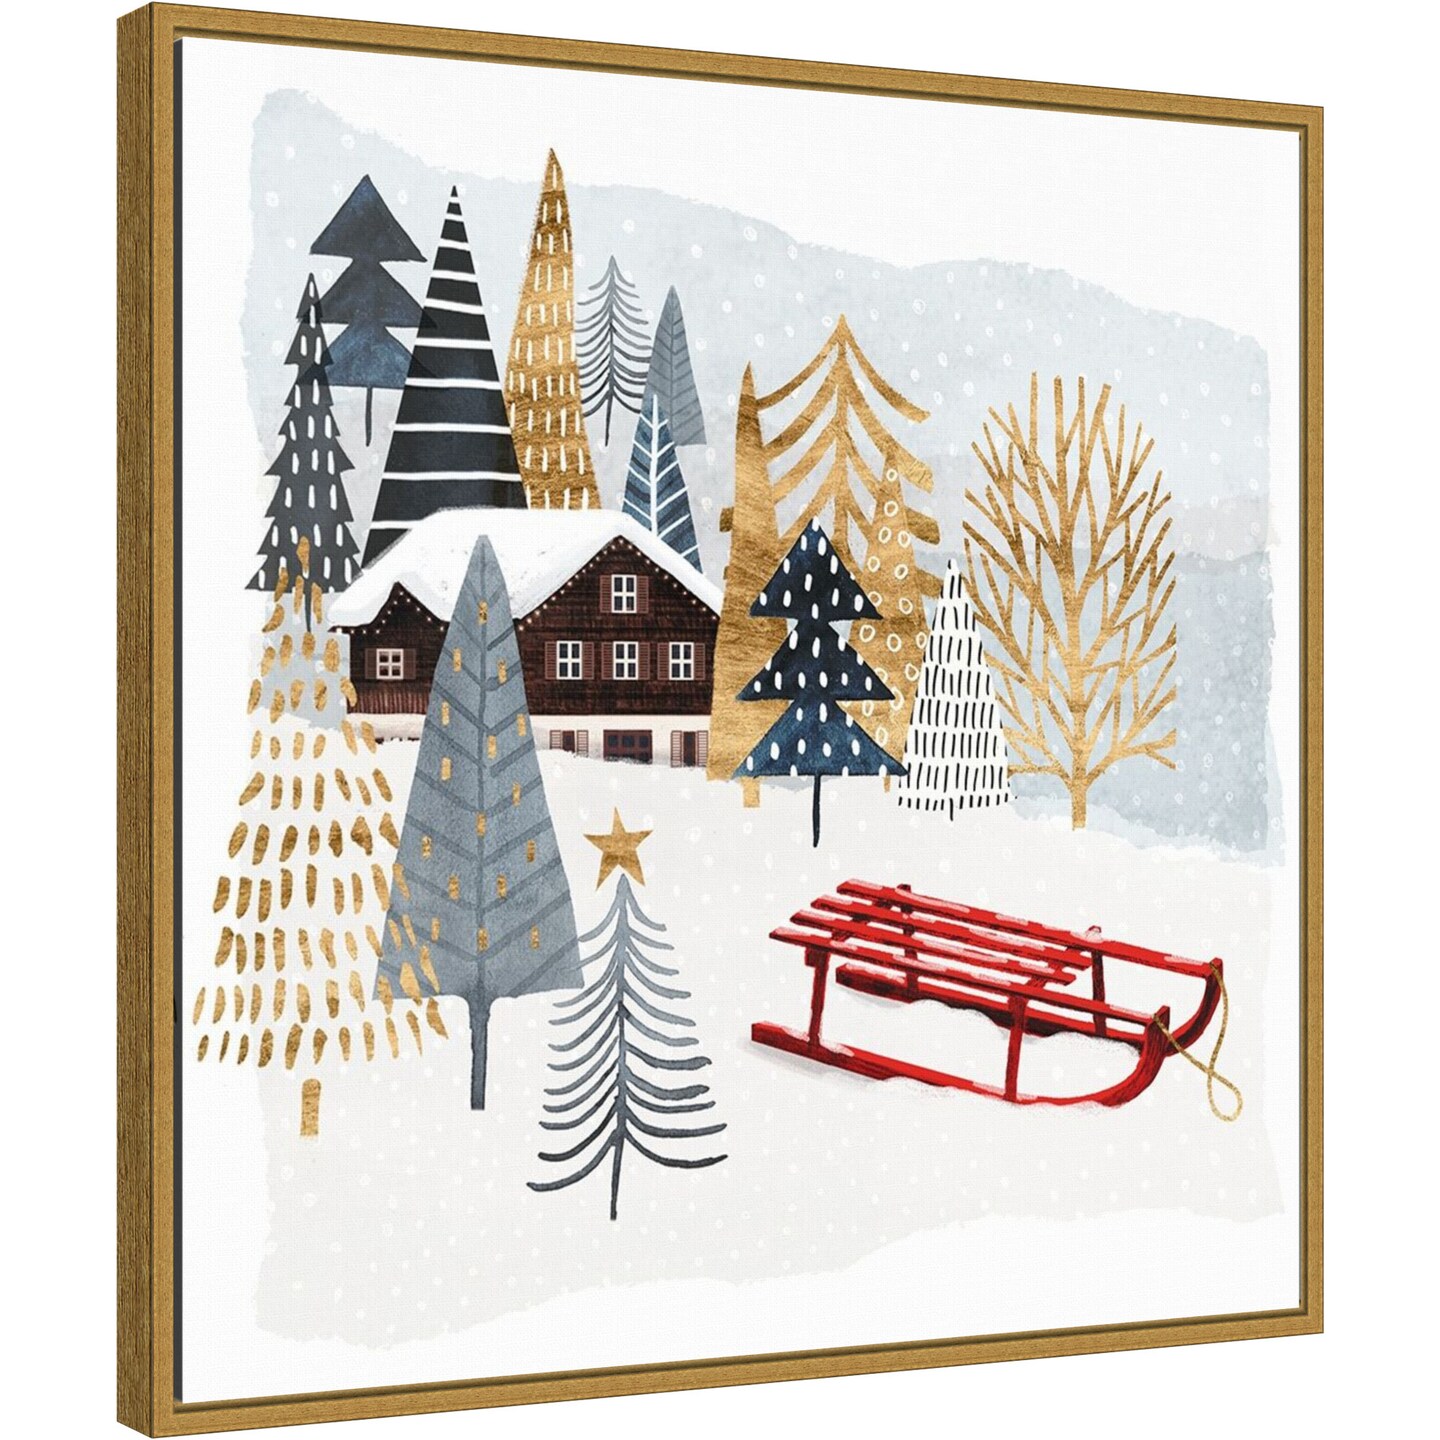 Christmas Chalet II by Victoria Borges 22-in. W x 22-in. H. Canvas Wall Art Print Framed in Gold